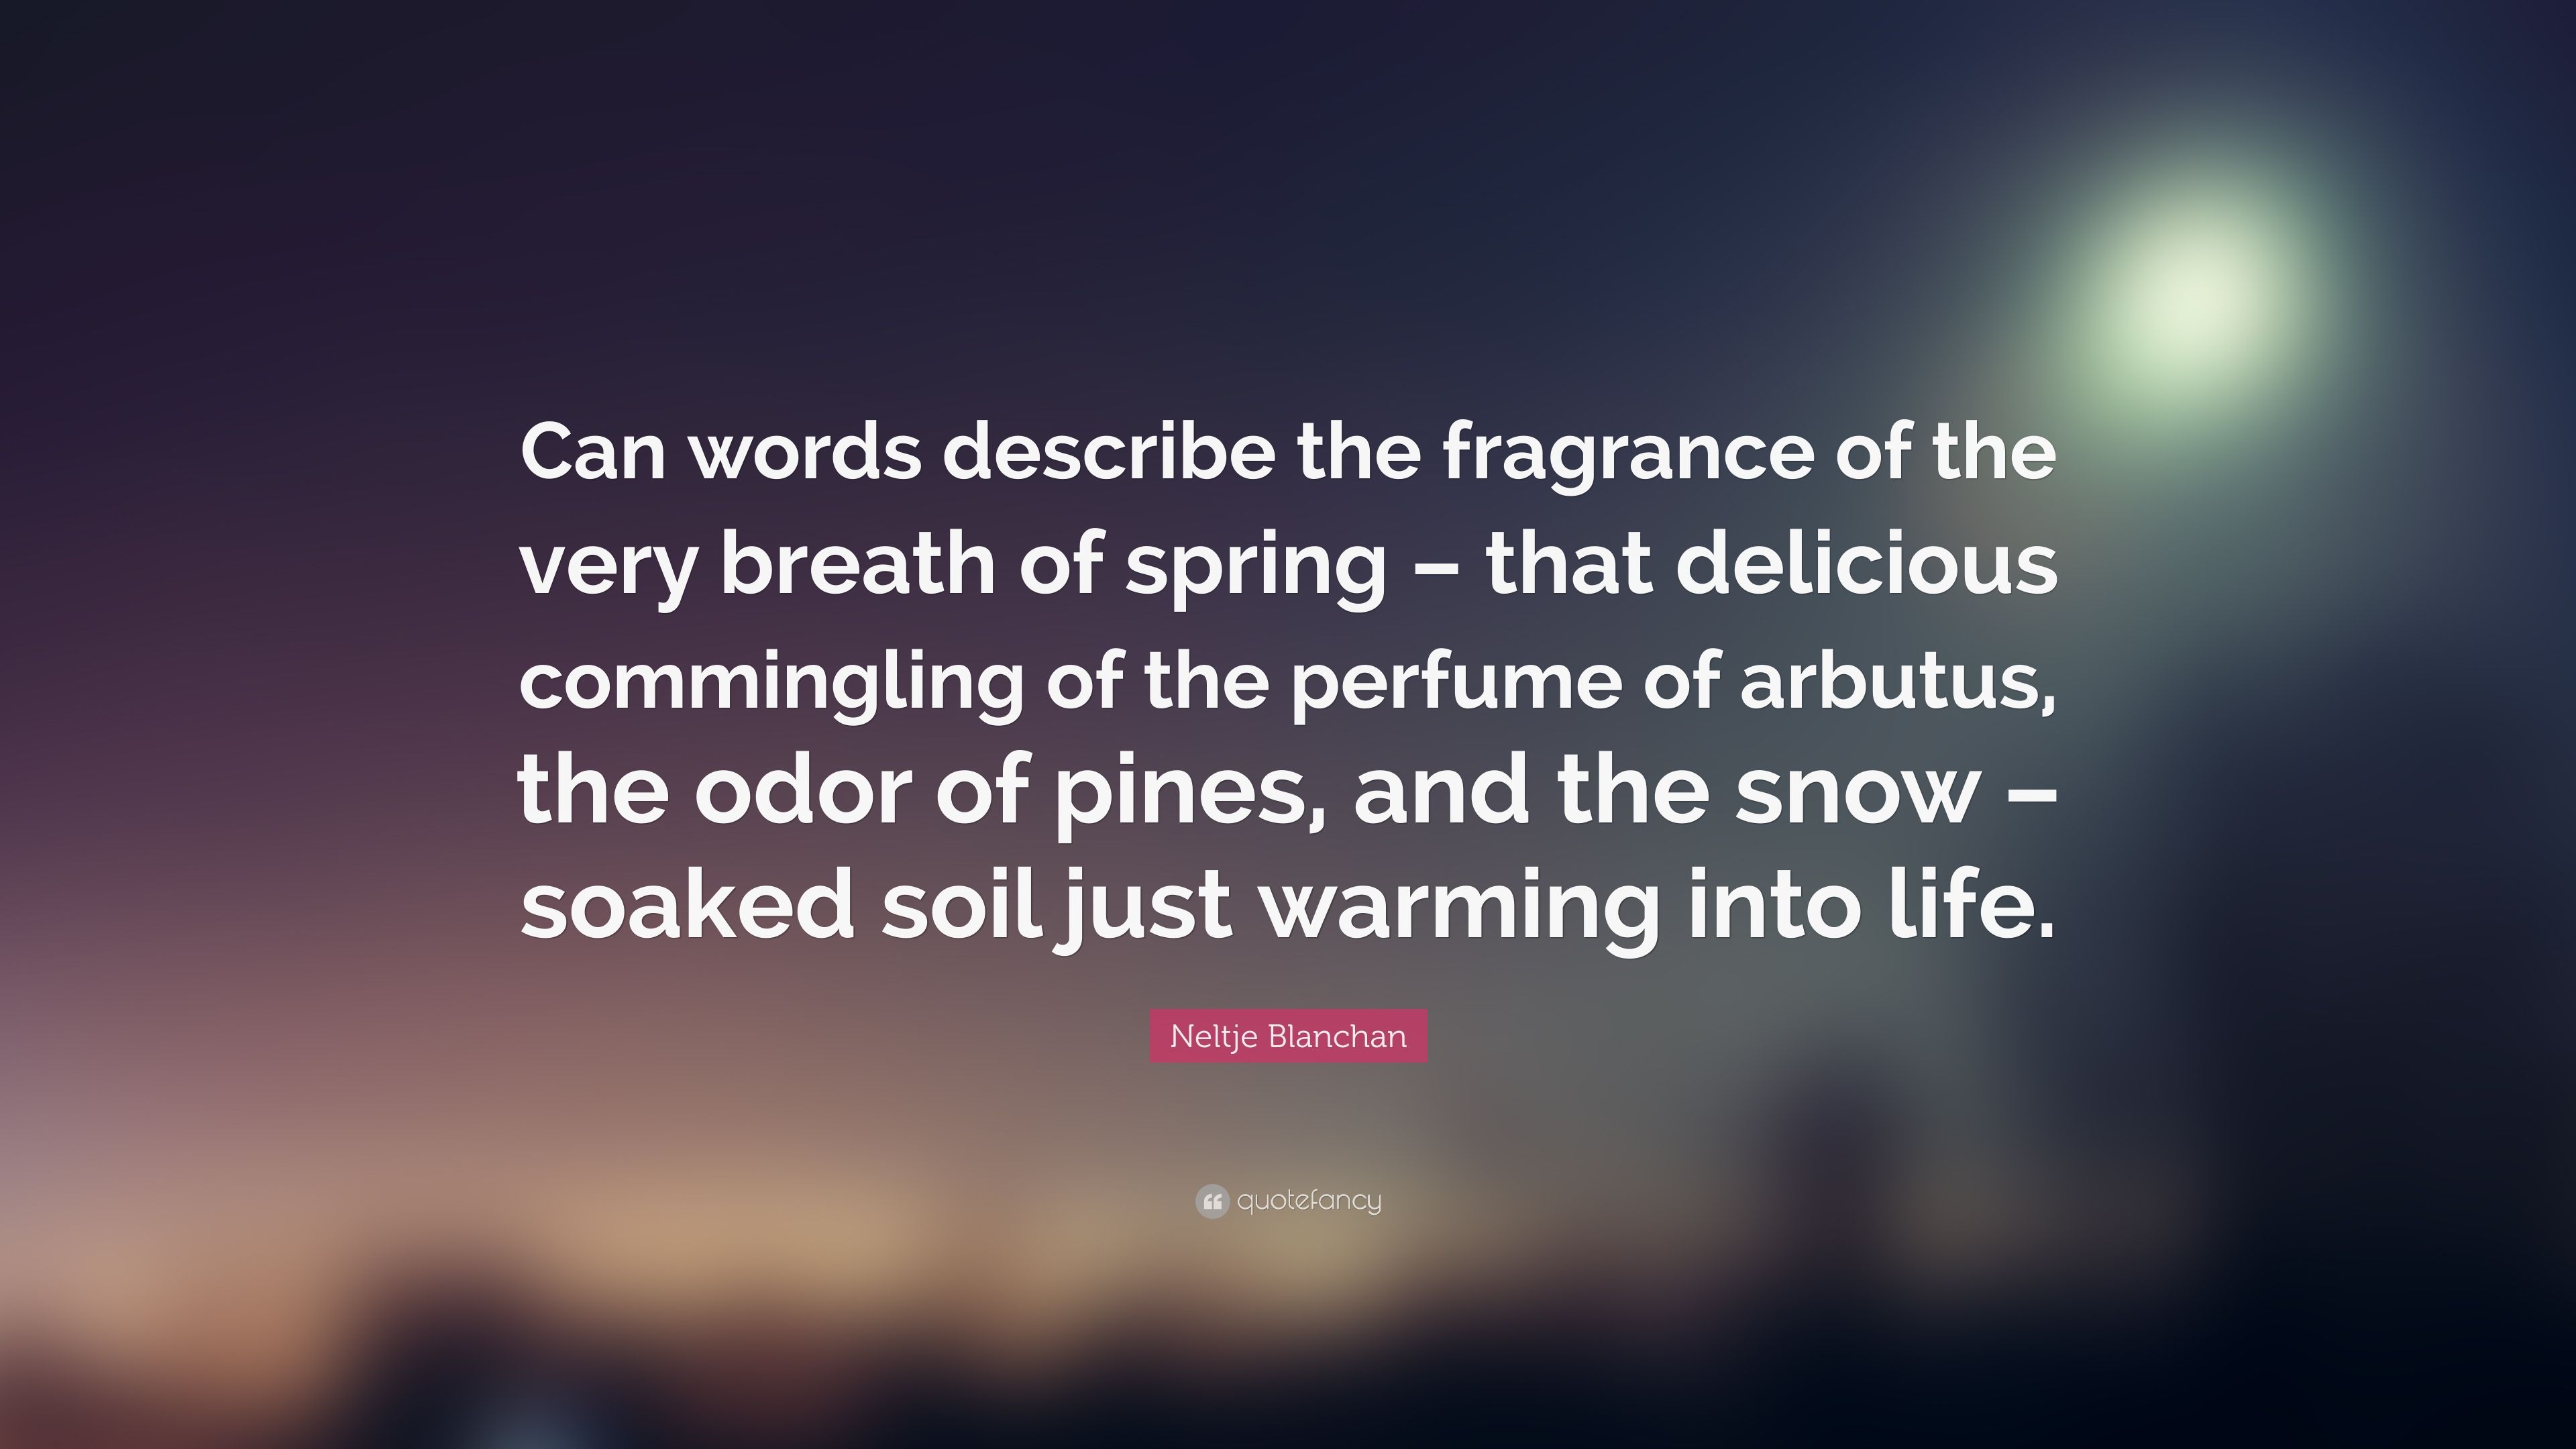 Neltje Blanchan Quote: “Can words describe the fragrance